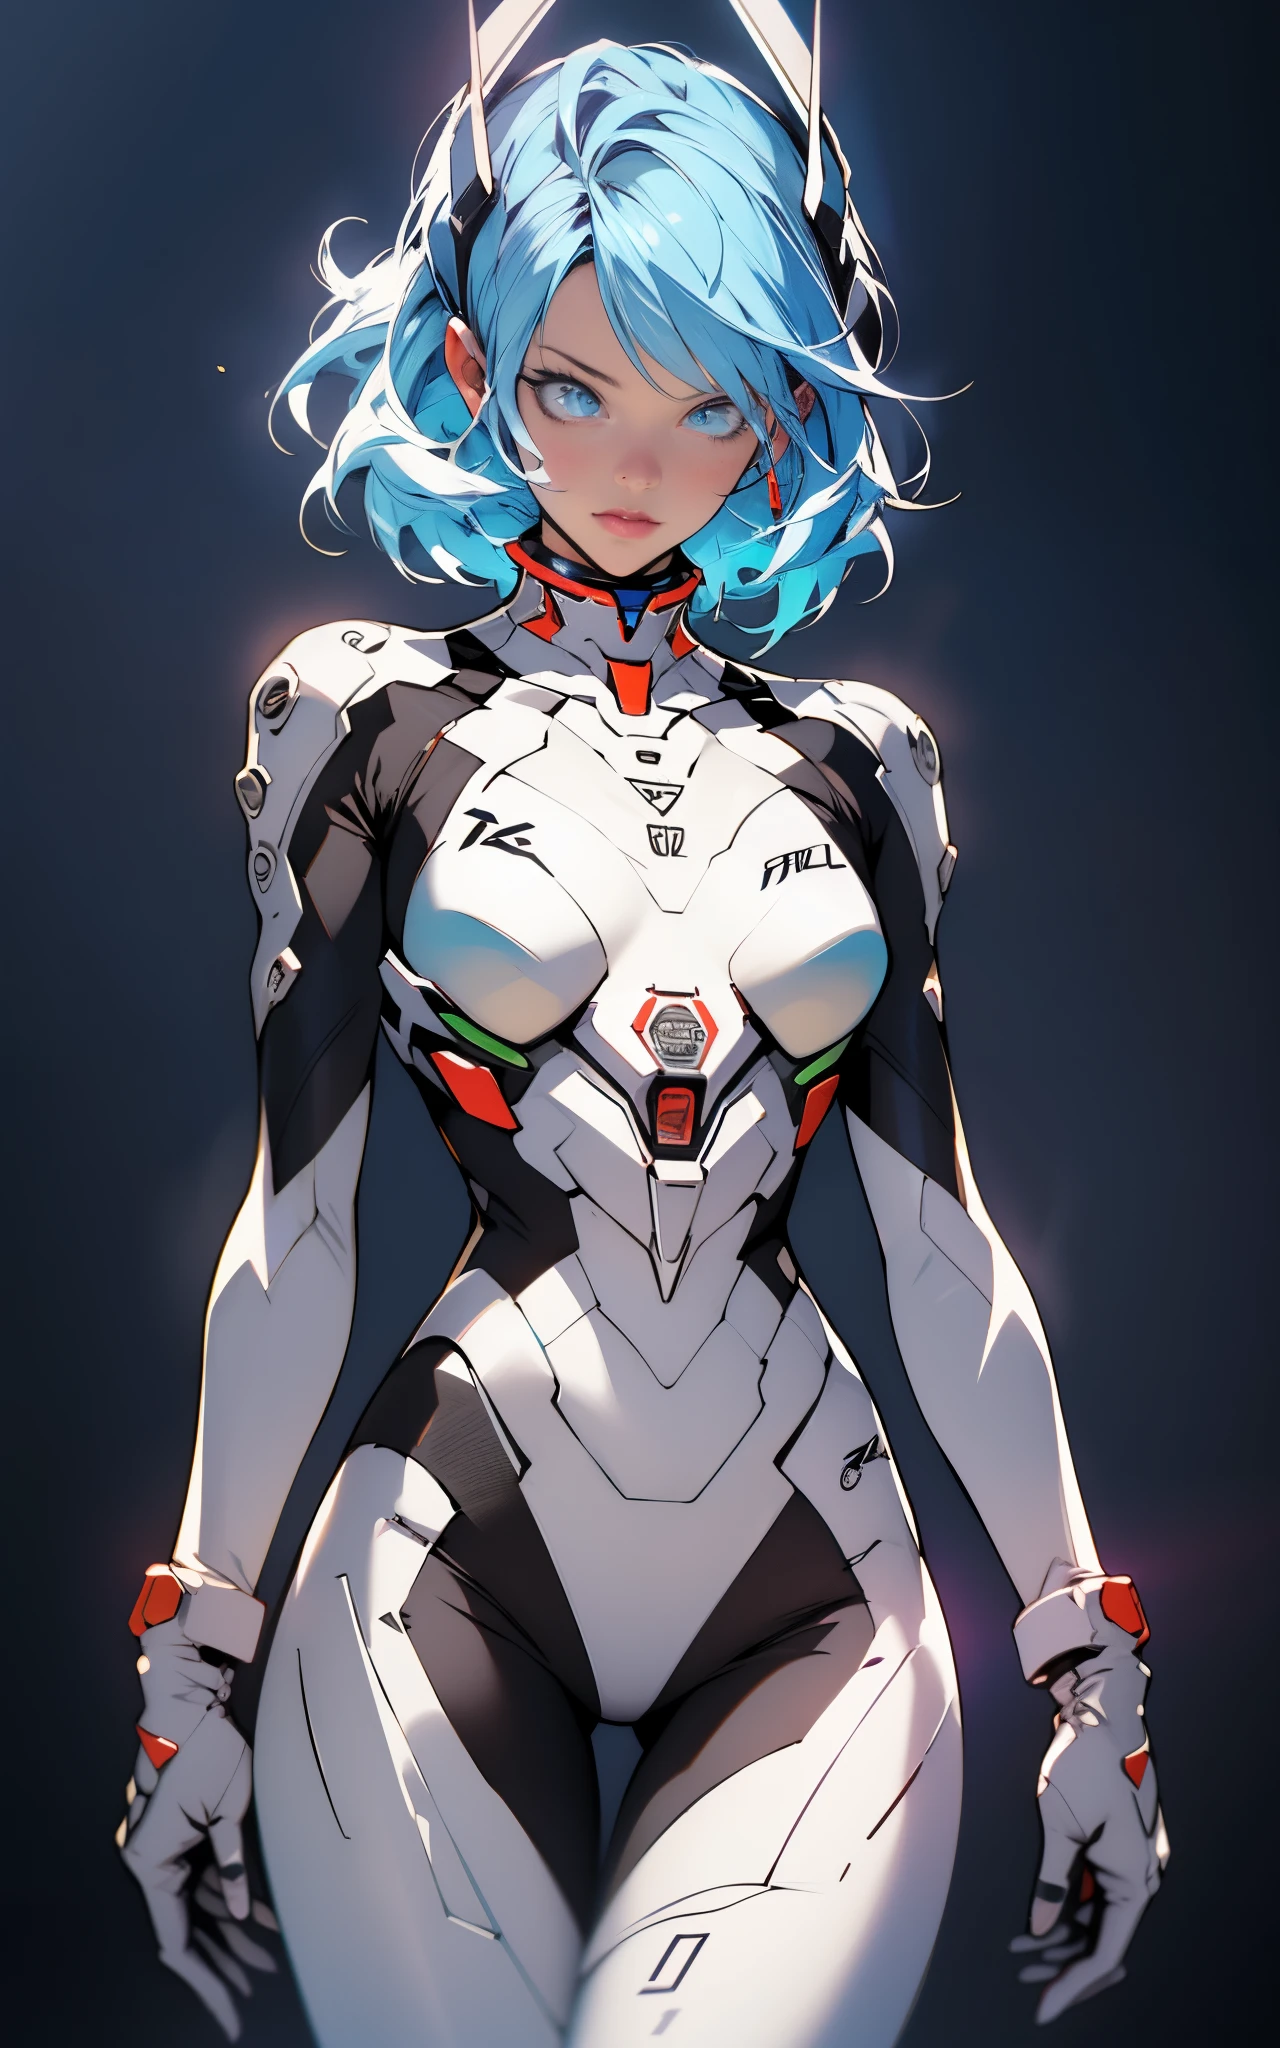 (((Adult Woman))), ((Best Quality)), ((masutepiece)), (Detailed: 1.4), (Absurd), 35-year-old adult woman with Simon Bisley-style micro thong, Genesis evangelion neon style clothing, 2-piece clothing, bobhair, arm tatoo, cybernetic hands, pastel, Centered, scale to fit the dimensions, nffsw (High dynamic range),Ray tracing,NVIDIA RTX,Hyper-Resolution,Unreal 5,Subsurface Dispersion,  PBR Texture, Post-processing, Anisotropy Filtering, depth of fields, Maximum clarity and sharpness, Multilayer textures, Albedo and specular maps, Surface Shading, accurate simulation of light and material interactions, Perfect proportions, Octane Render, Two-tone lighting, Wide aperture, Low ISO, White Balance, thirds rule, 8K Raw, Crysisnanosuit,loraeyes,nijistyle,cateyes,Blue hair, Blue eyes